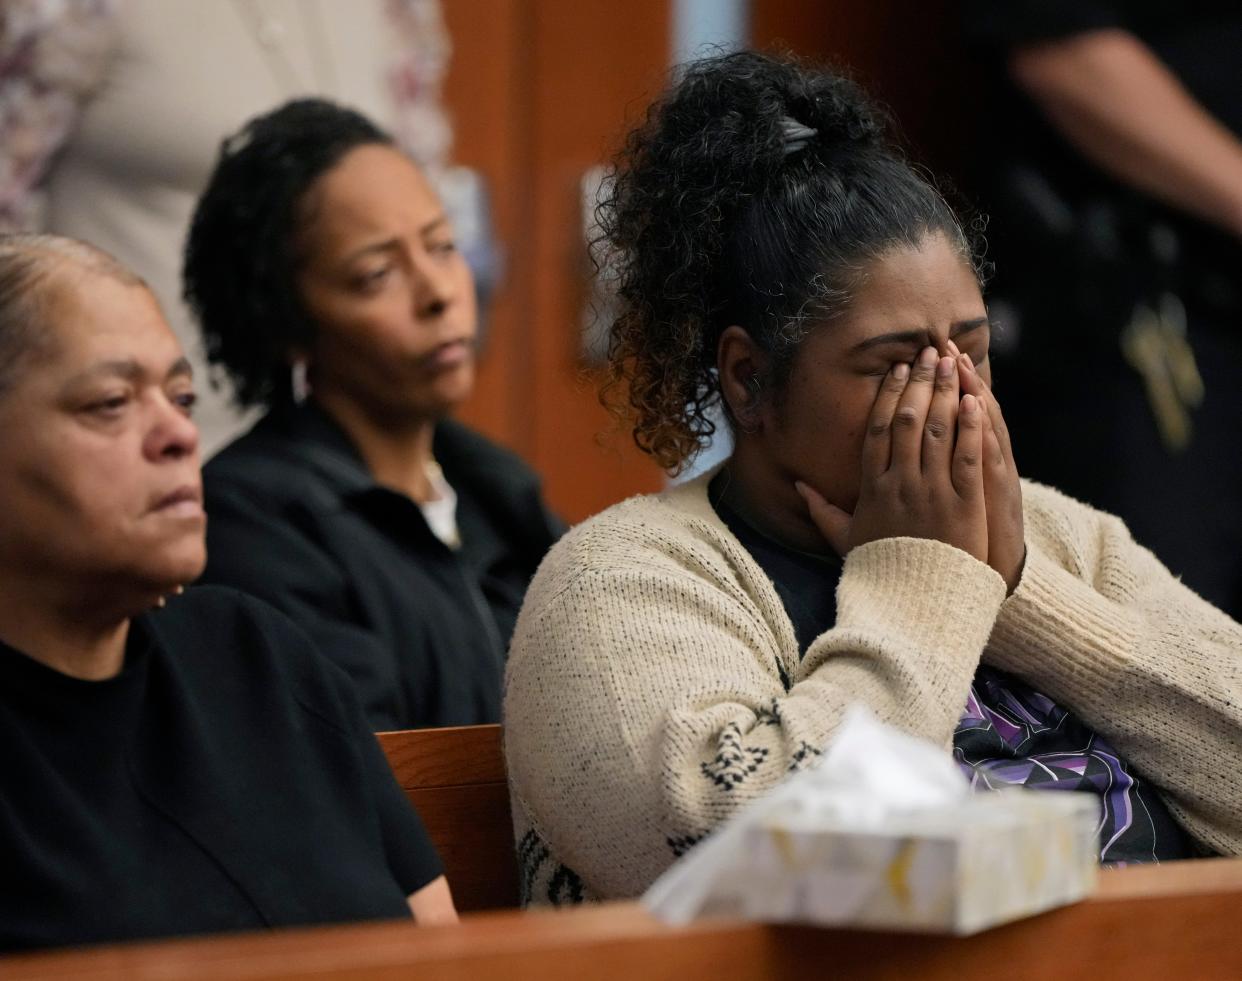 Roniesh Perry, Christina Perry's younger sister, reacts during the sentencing Tuesday of Ricky Williams Jr., 34, of Columbus' South Side, for fatally shooting Christina in front of Christina's teenage son in the first of two back-to-back road rage shootings in October 2020. A second woman Williams shot at the next day escaped injury.  Williams was sentenced to life in prison with the opportunity for parole in 22 years under the terms of his plea agreement.